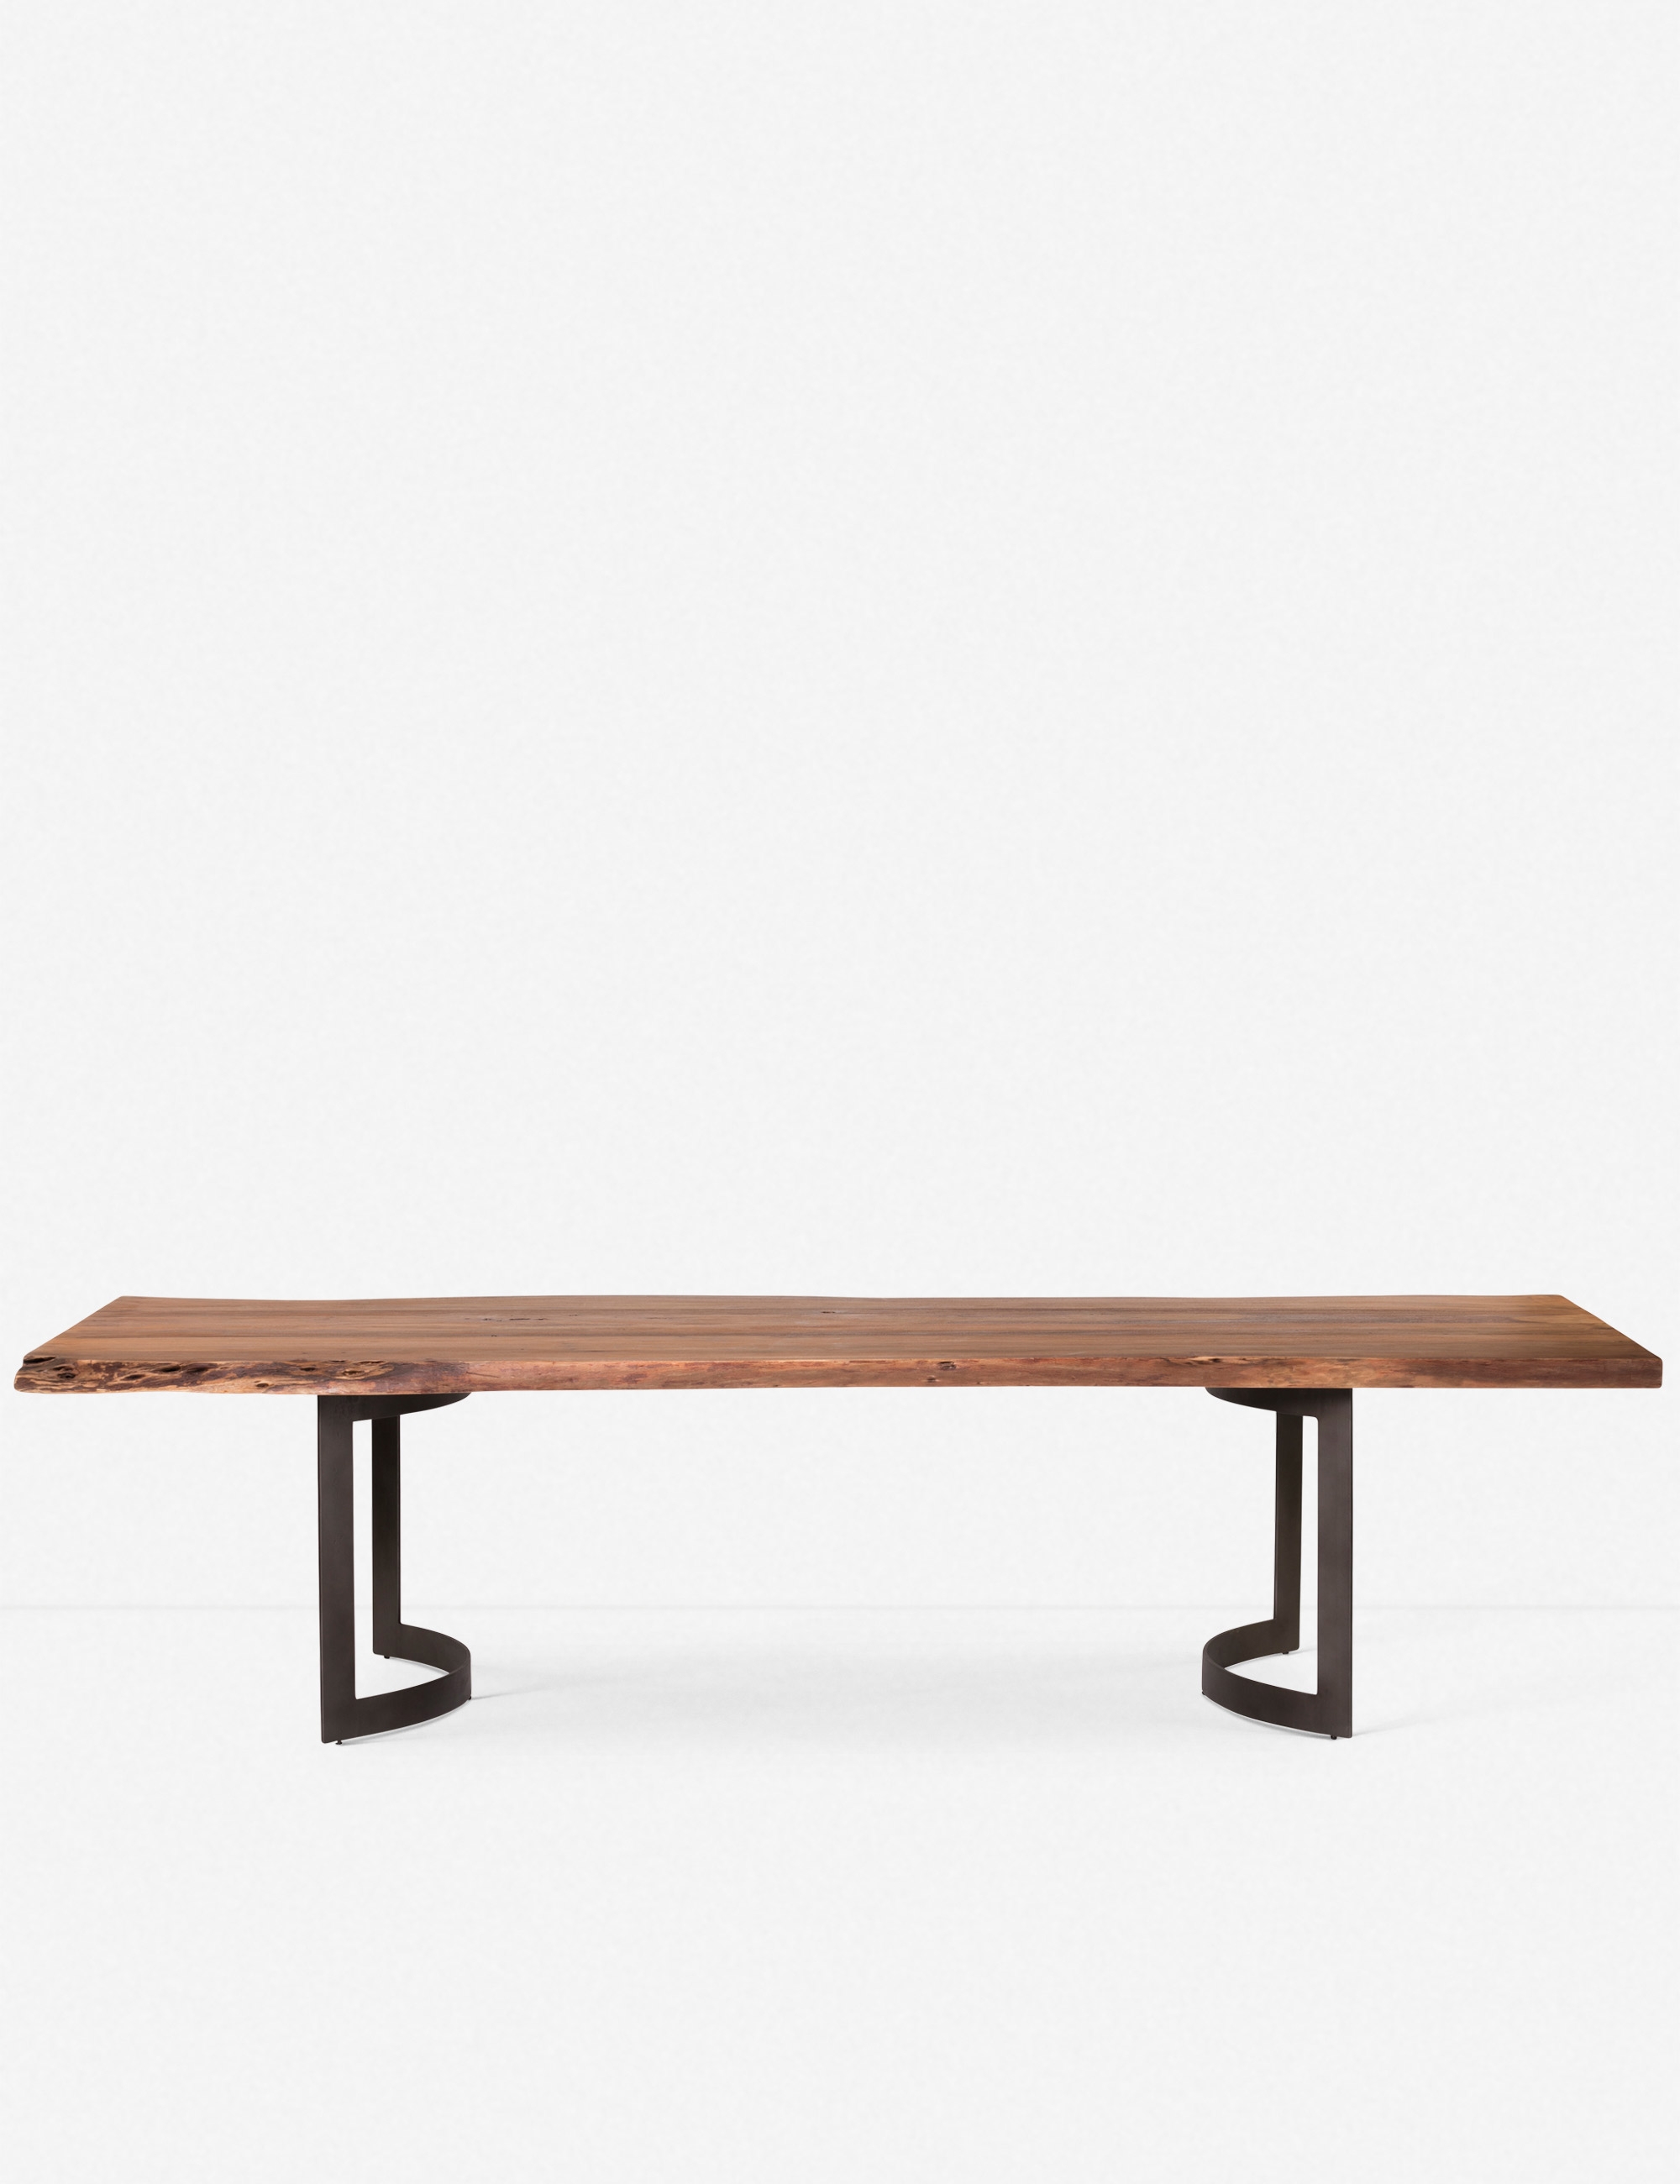 Fer Dining Table - Image 1